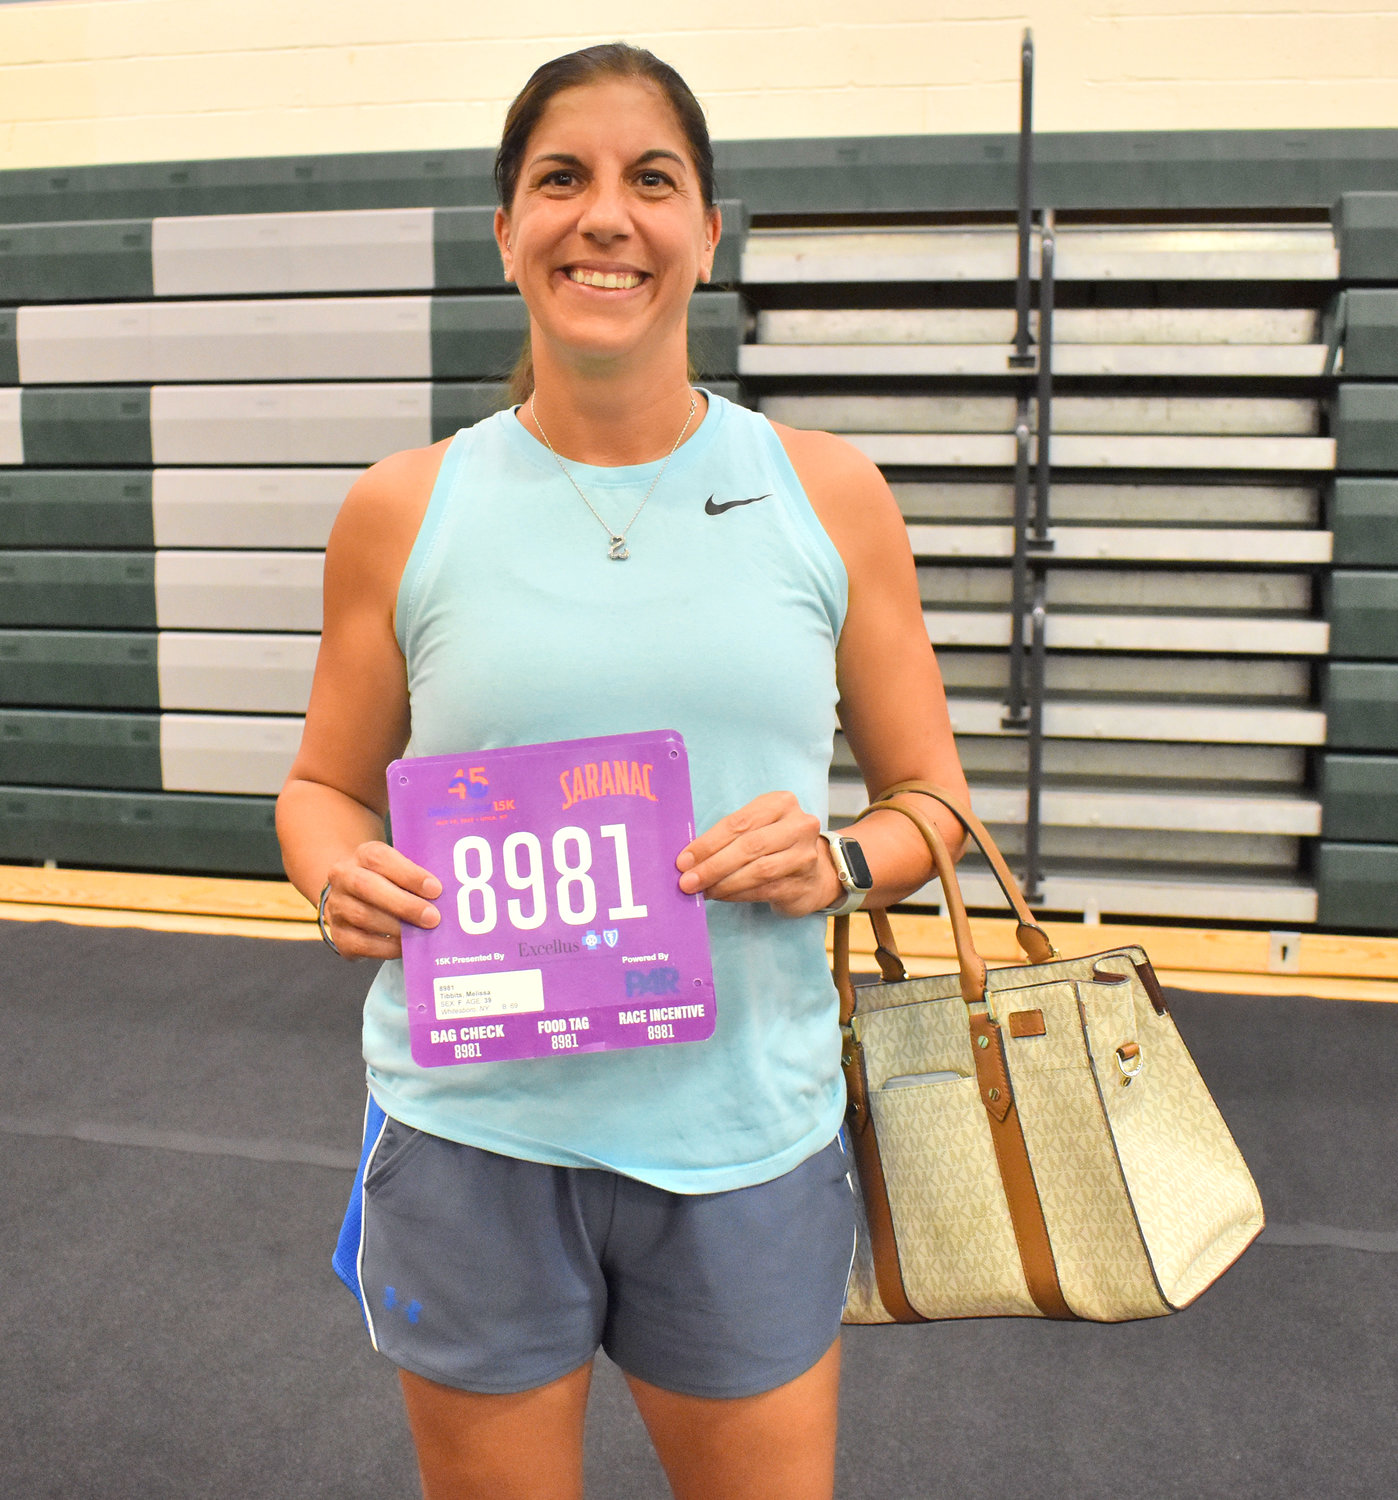 Melissa Tibbits, of Whitesboro, picks up her charity bib for the 15K race. This year, Tibbits is running in support of pediatric cancer charity, “On My Team 16.”